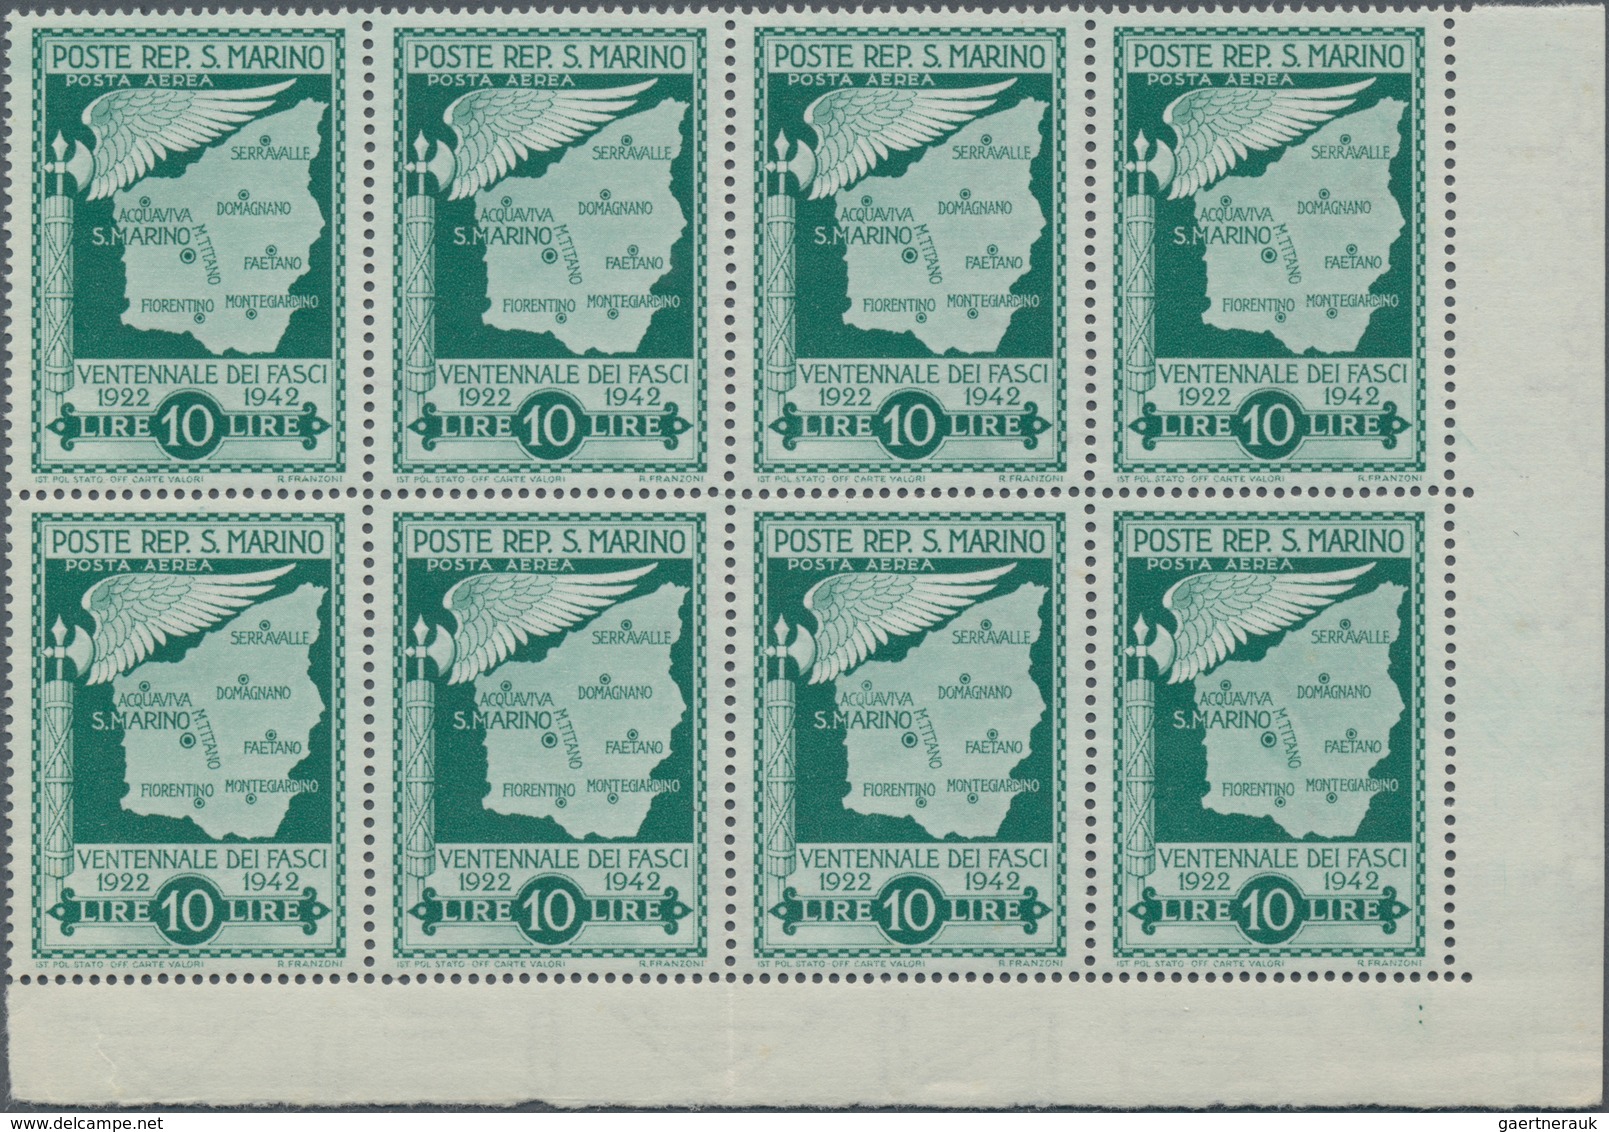 San Marino: 1943, Downfall Of Facism UNISSUED Airmail Stamp 10lire Green Without Overprint In A Lot - Gebraucht